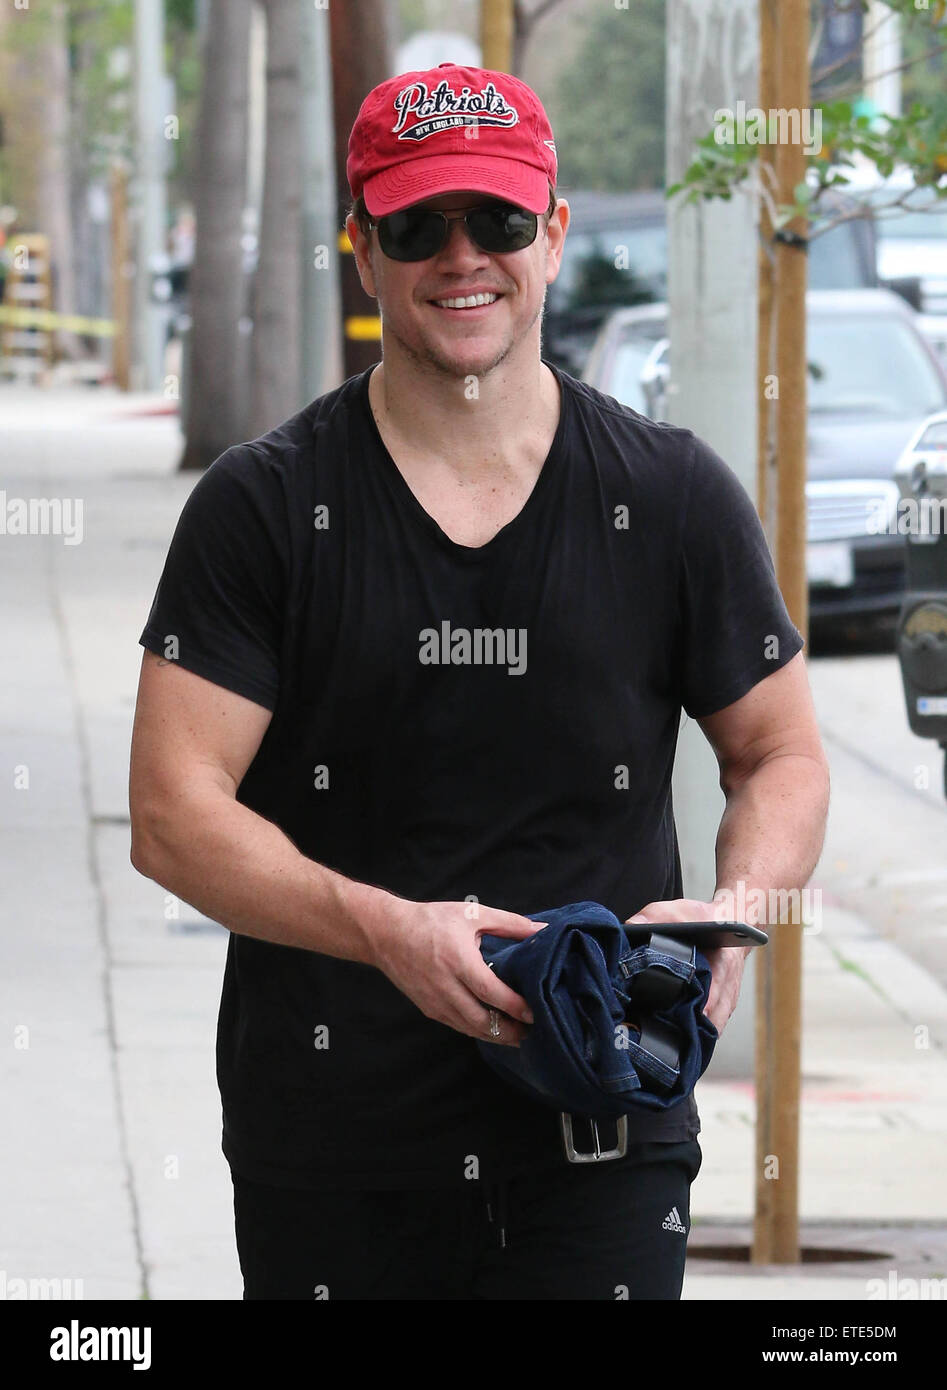 Matt Damon leaves the gym wearing a New England Patriots cap, showing  support for his hometown team in the upcoming NFL Super Bowl XLIX  Featuring: Matt Damon Where: Los Angeles, California, United